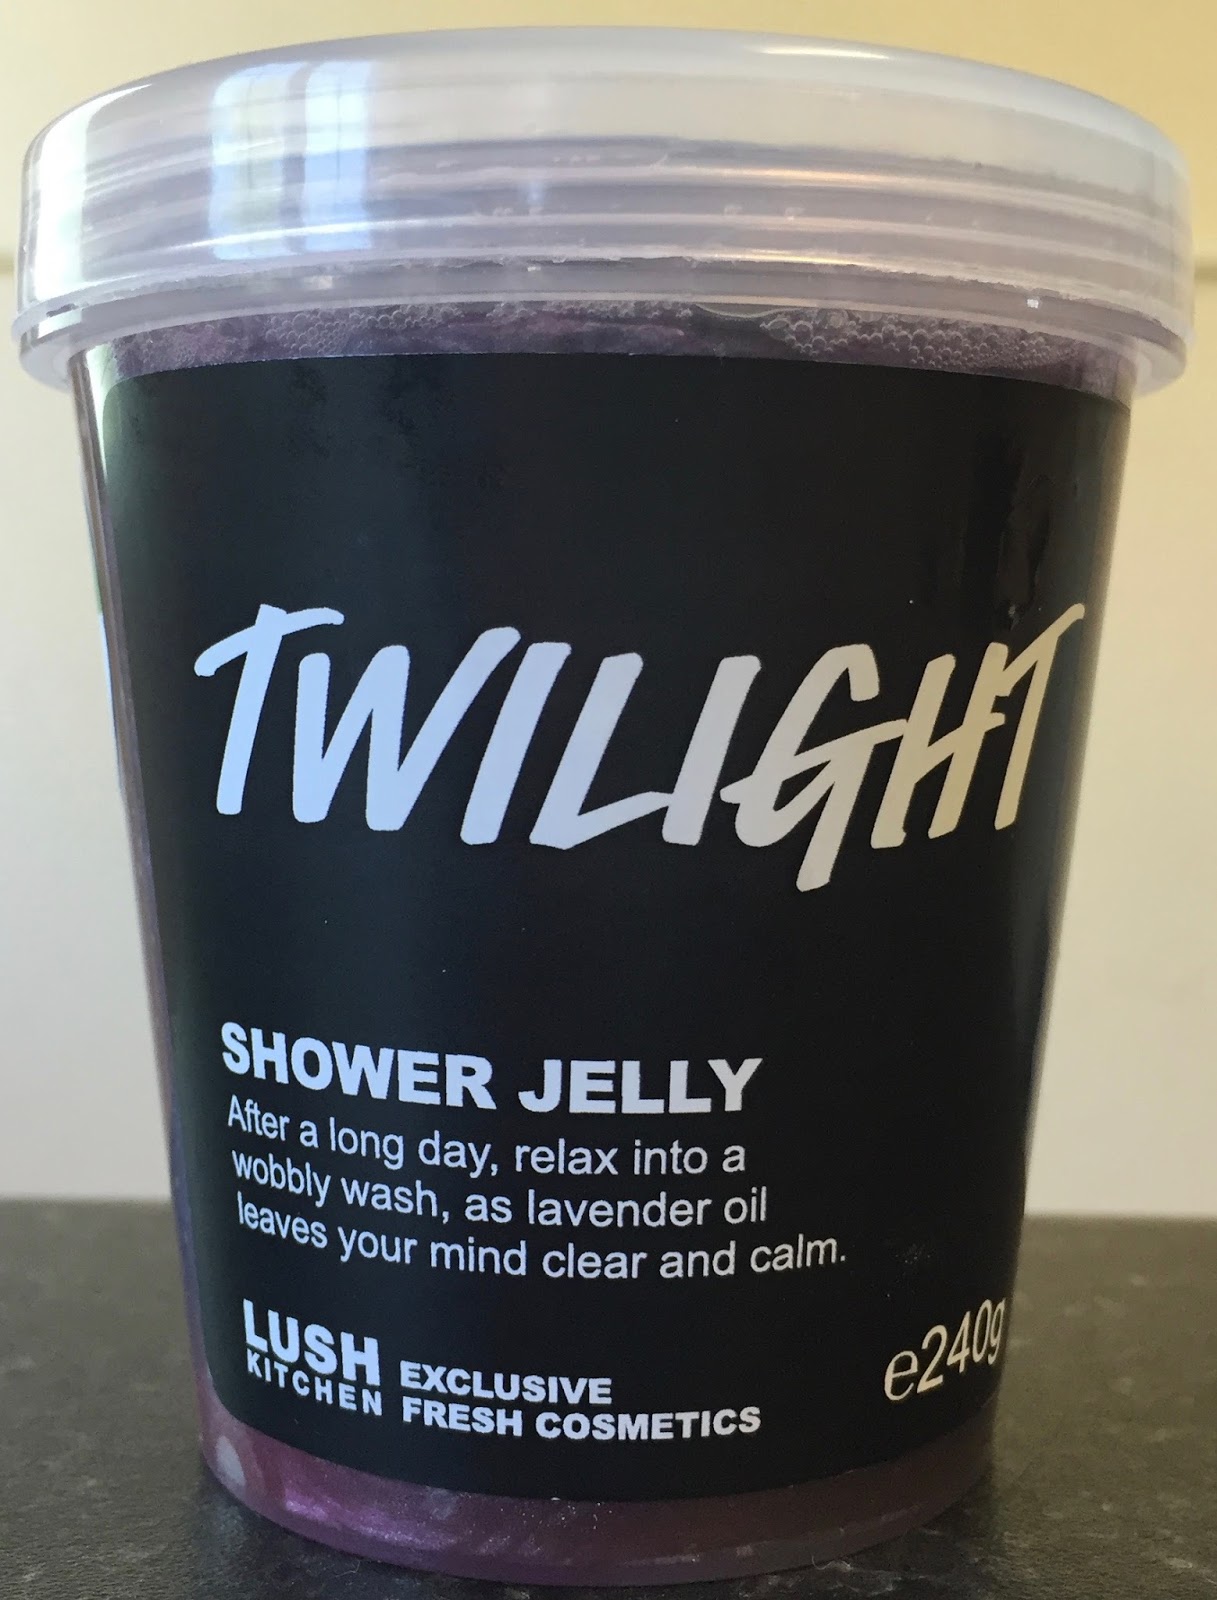 All Things Lush UK: Twilight Shower Jelly